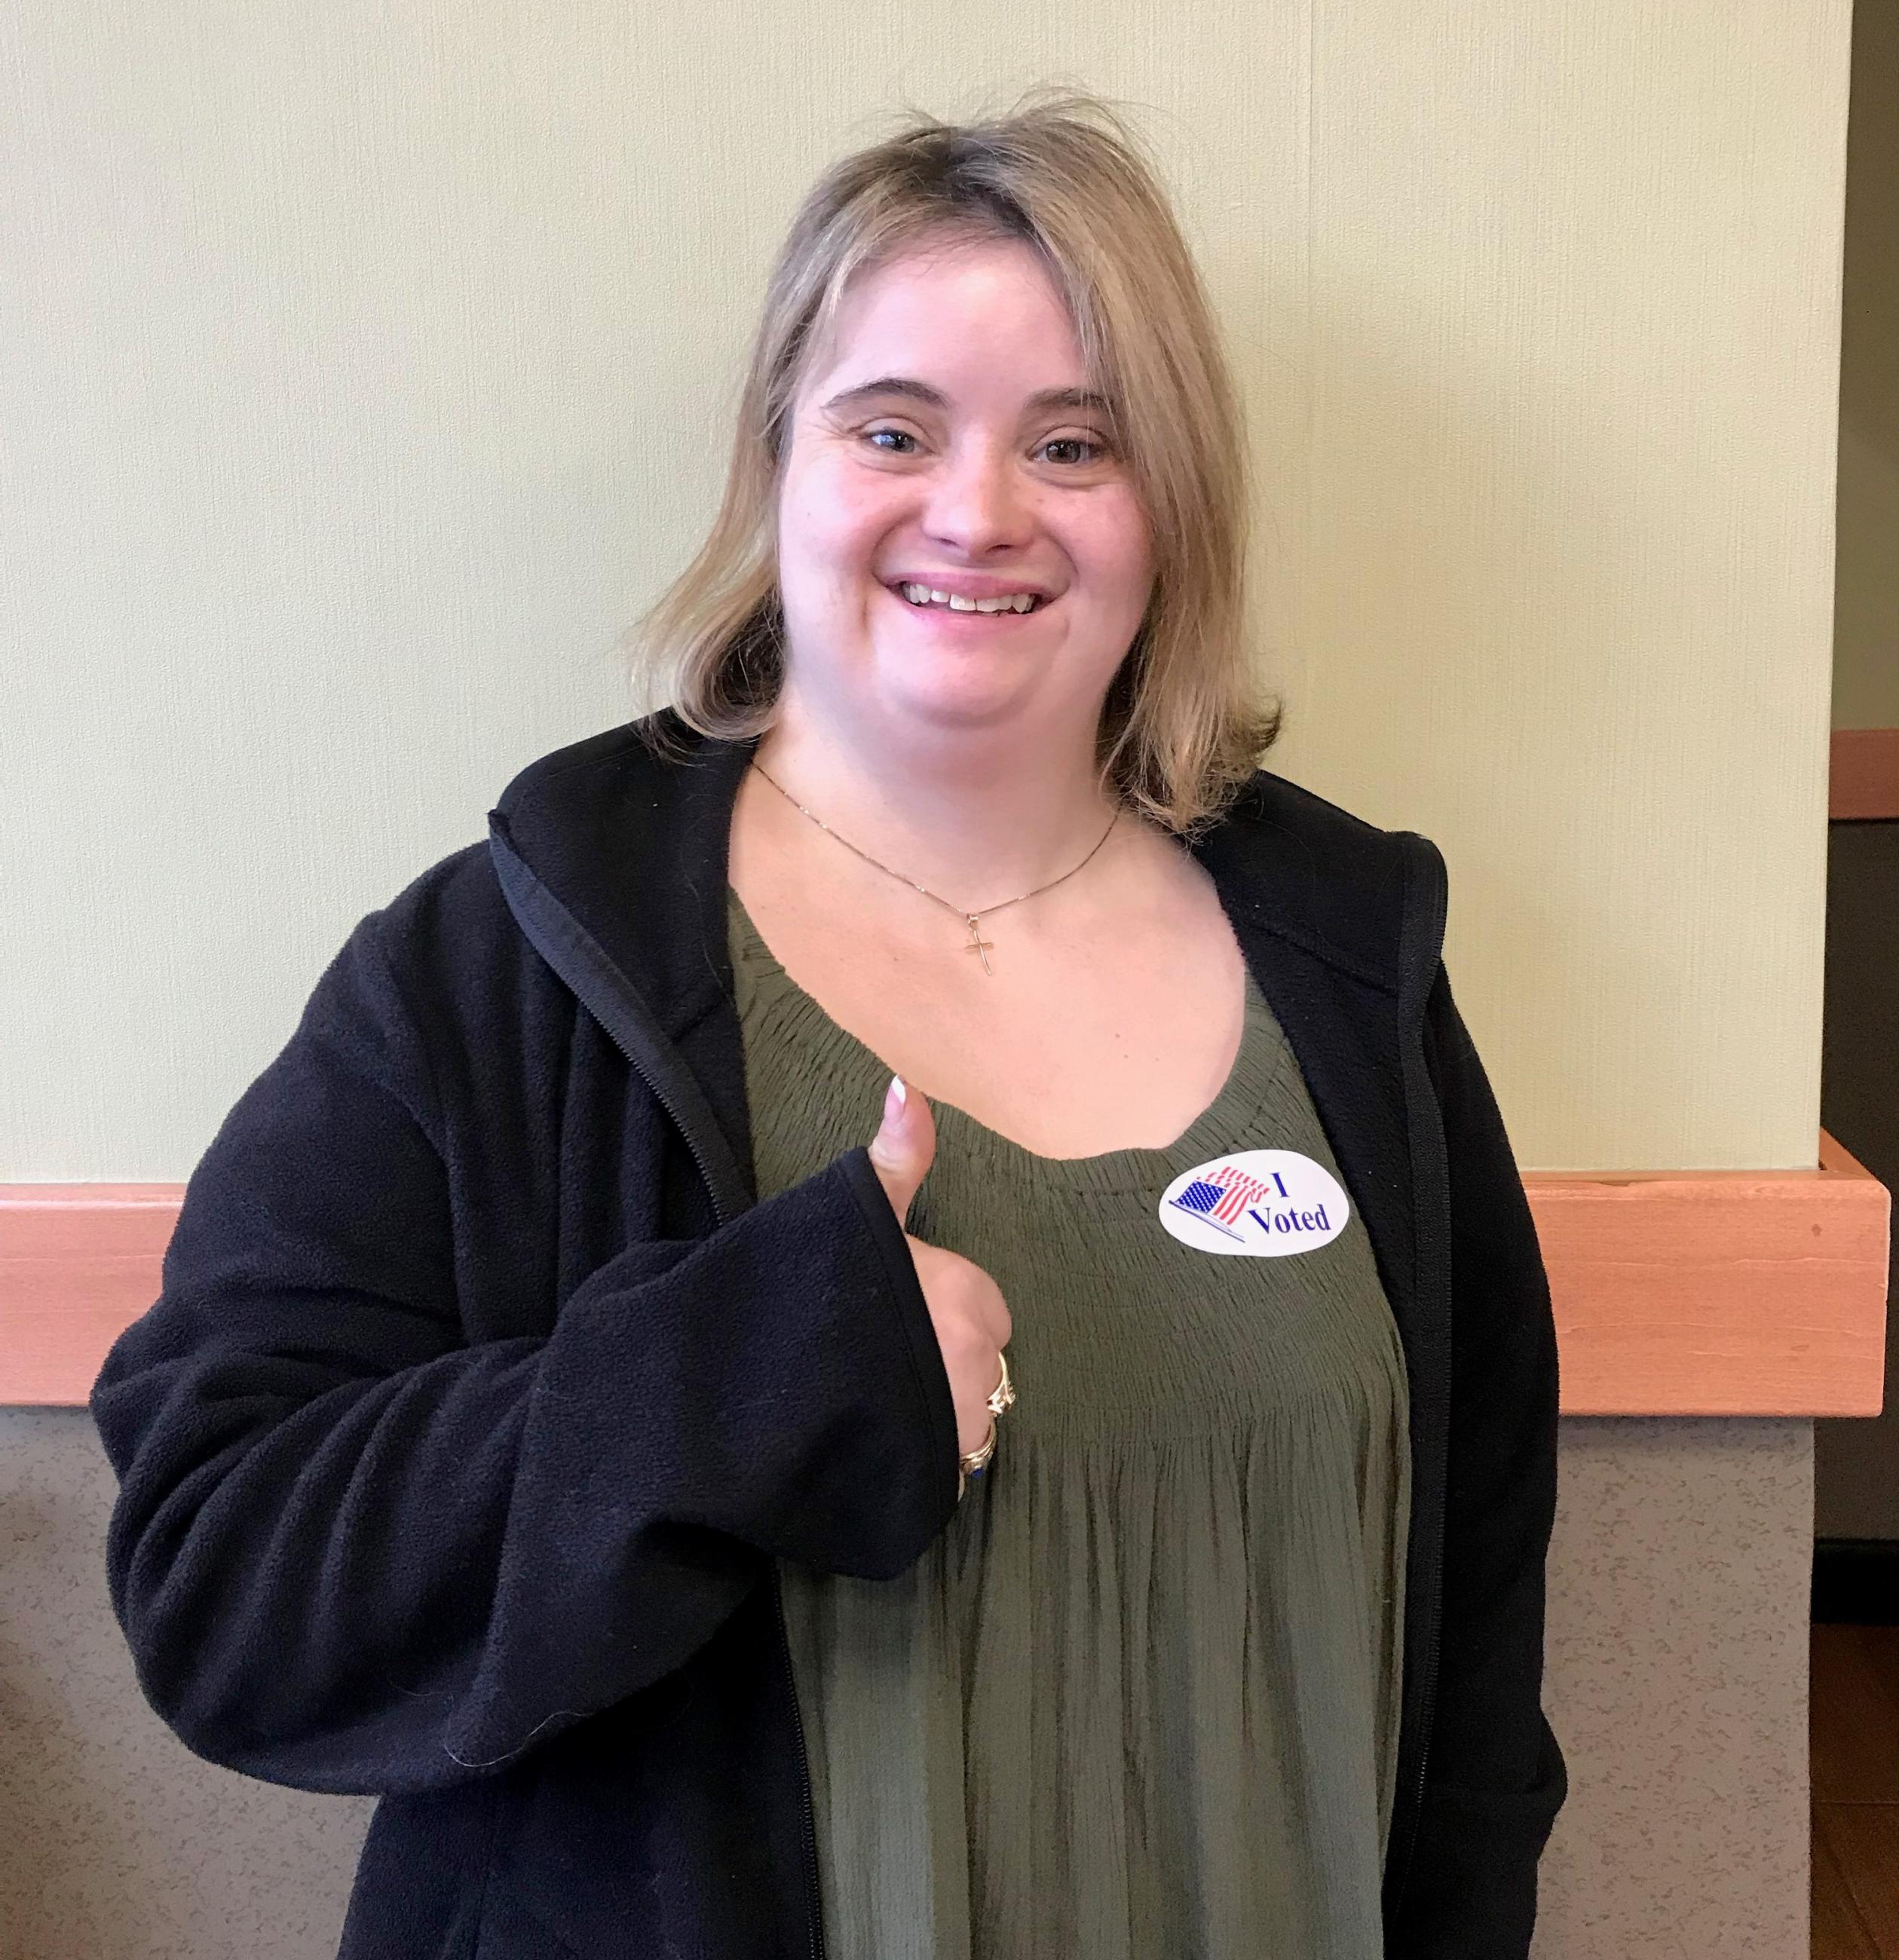 woman with down syndrome voting and giving thumbs up to camera